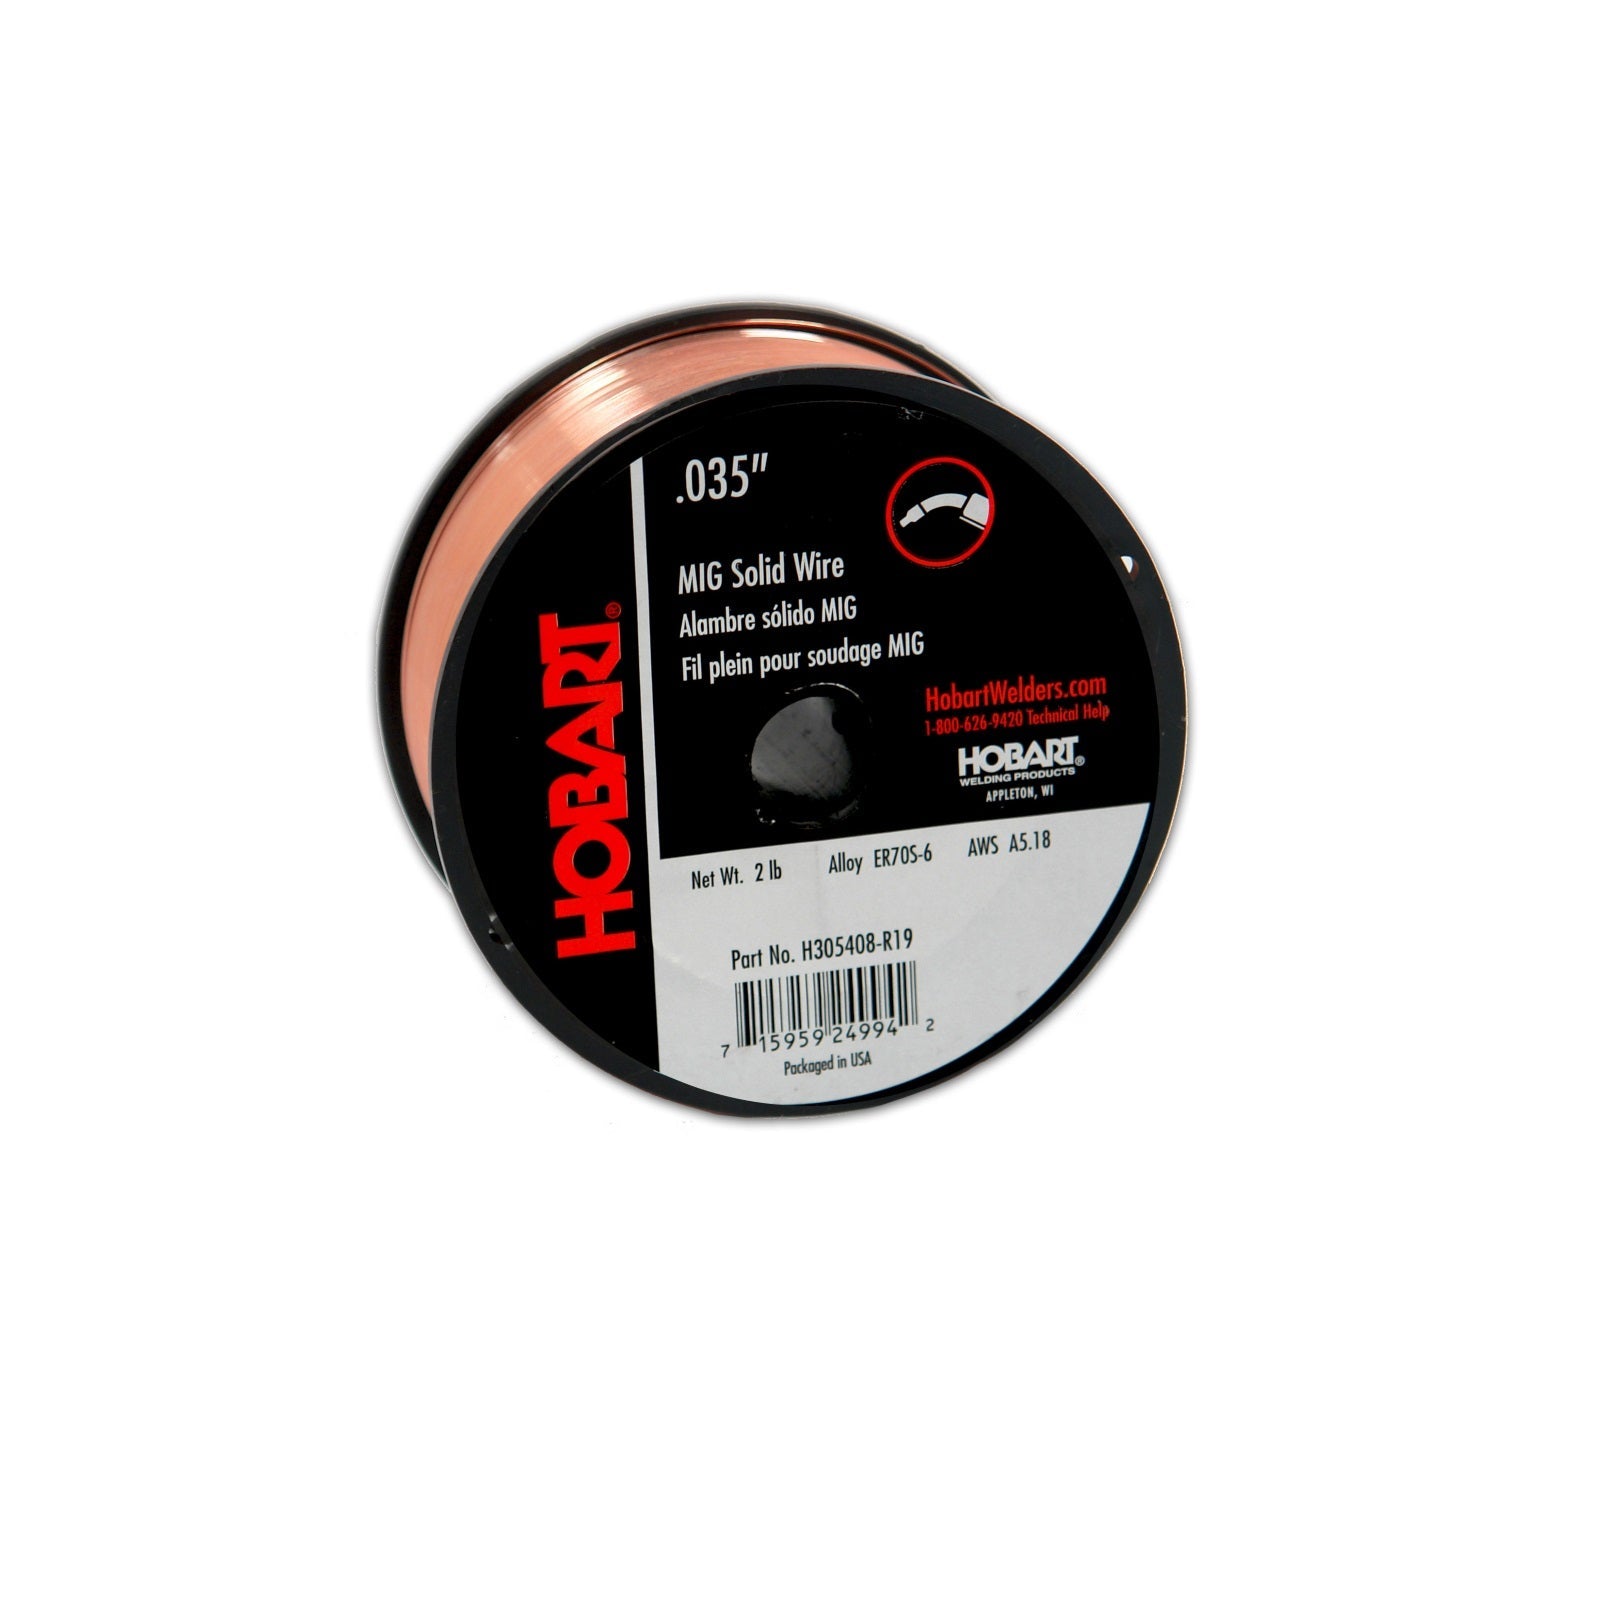 Hobart ER 70S6 MIG Wire .035 X 2 Lb (4") Spool